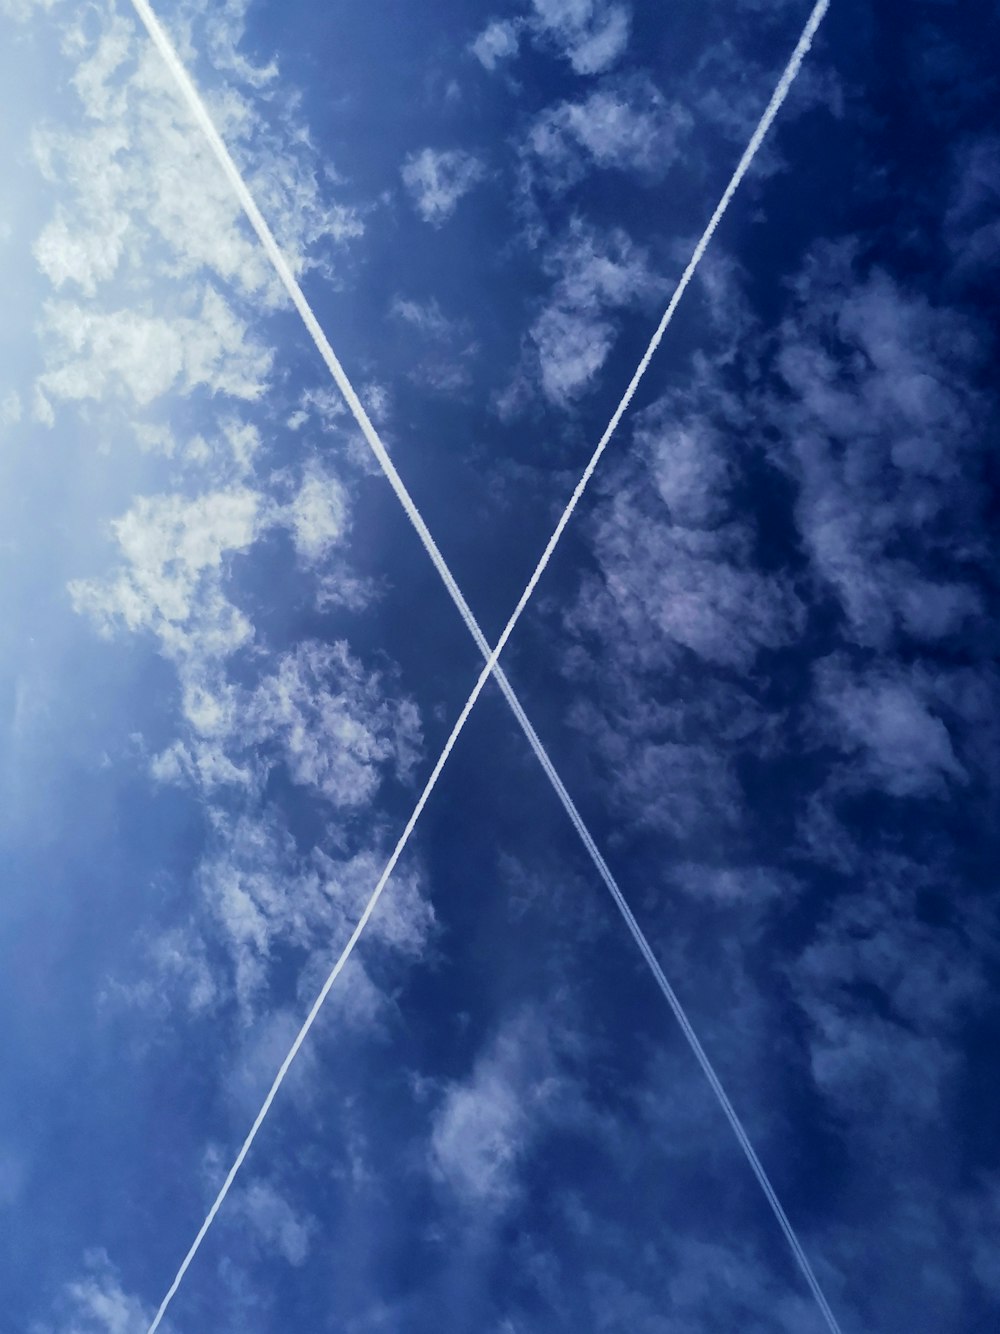 two contrails in a blue sky with white clouds